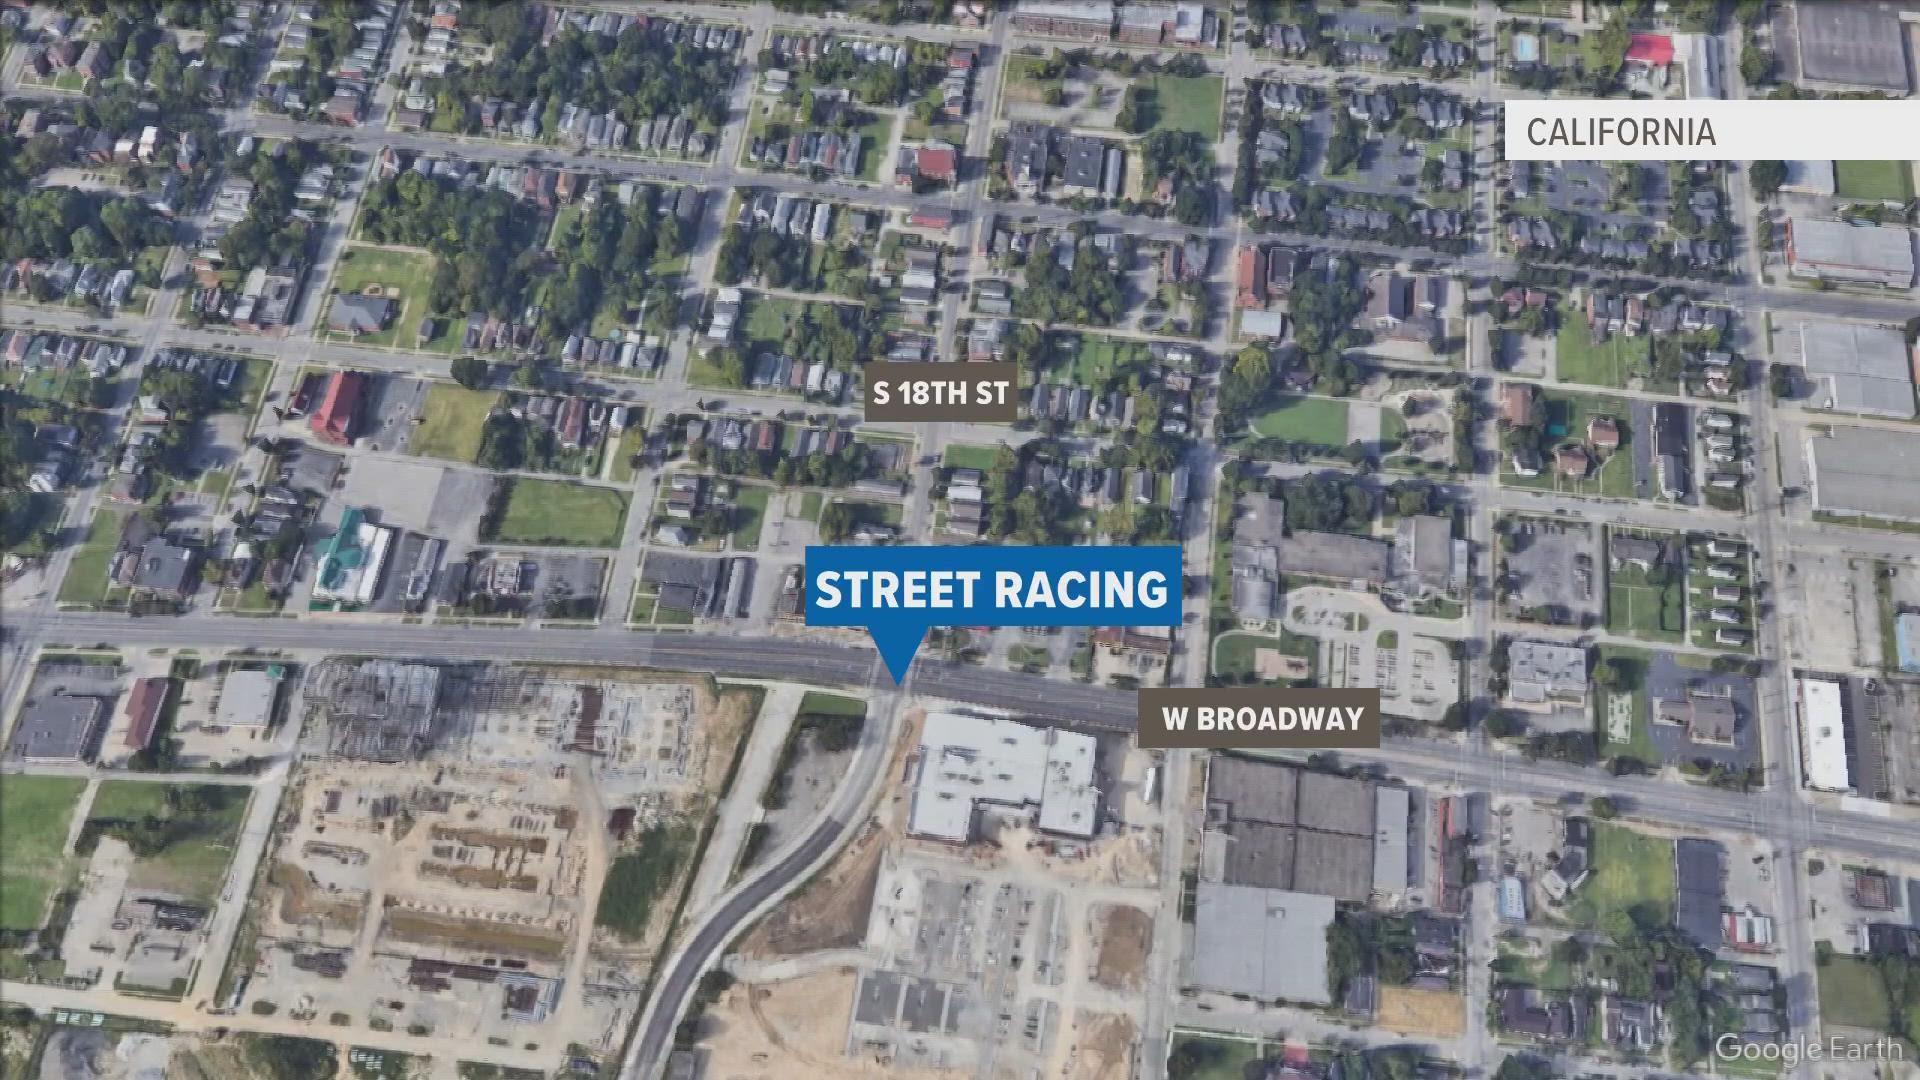 Louisville police said the "racers" were blocking multiple intersections that kept a couple of ambulances from getting to hospitals and traffic at a standstill.